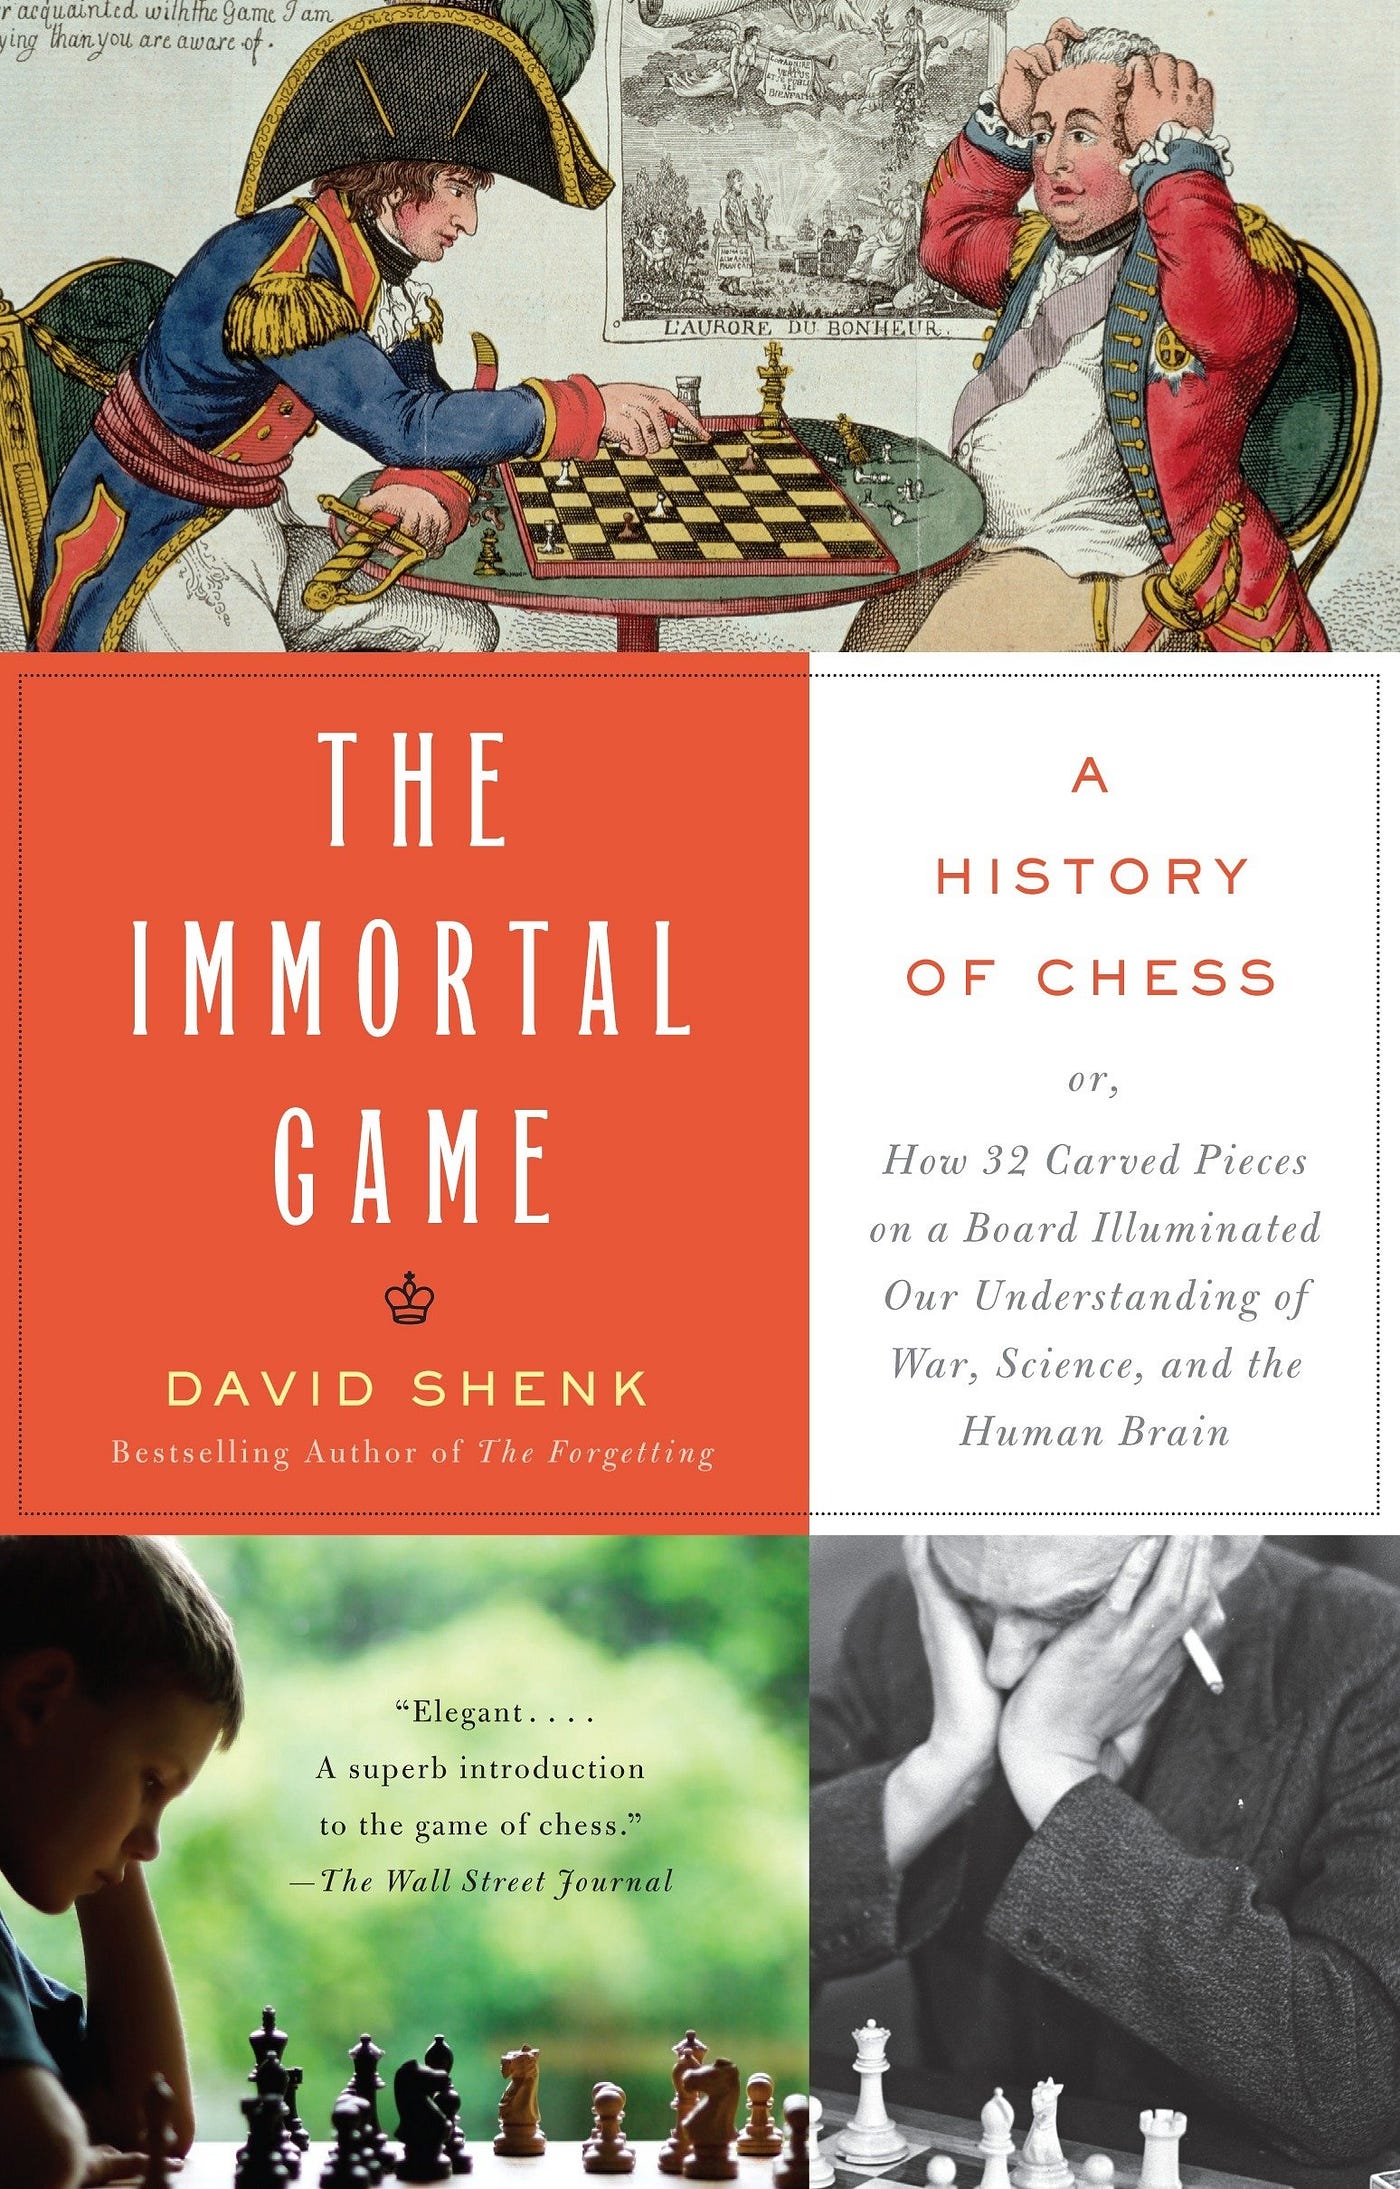 What is The Immortal Game?